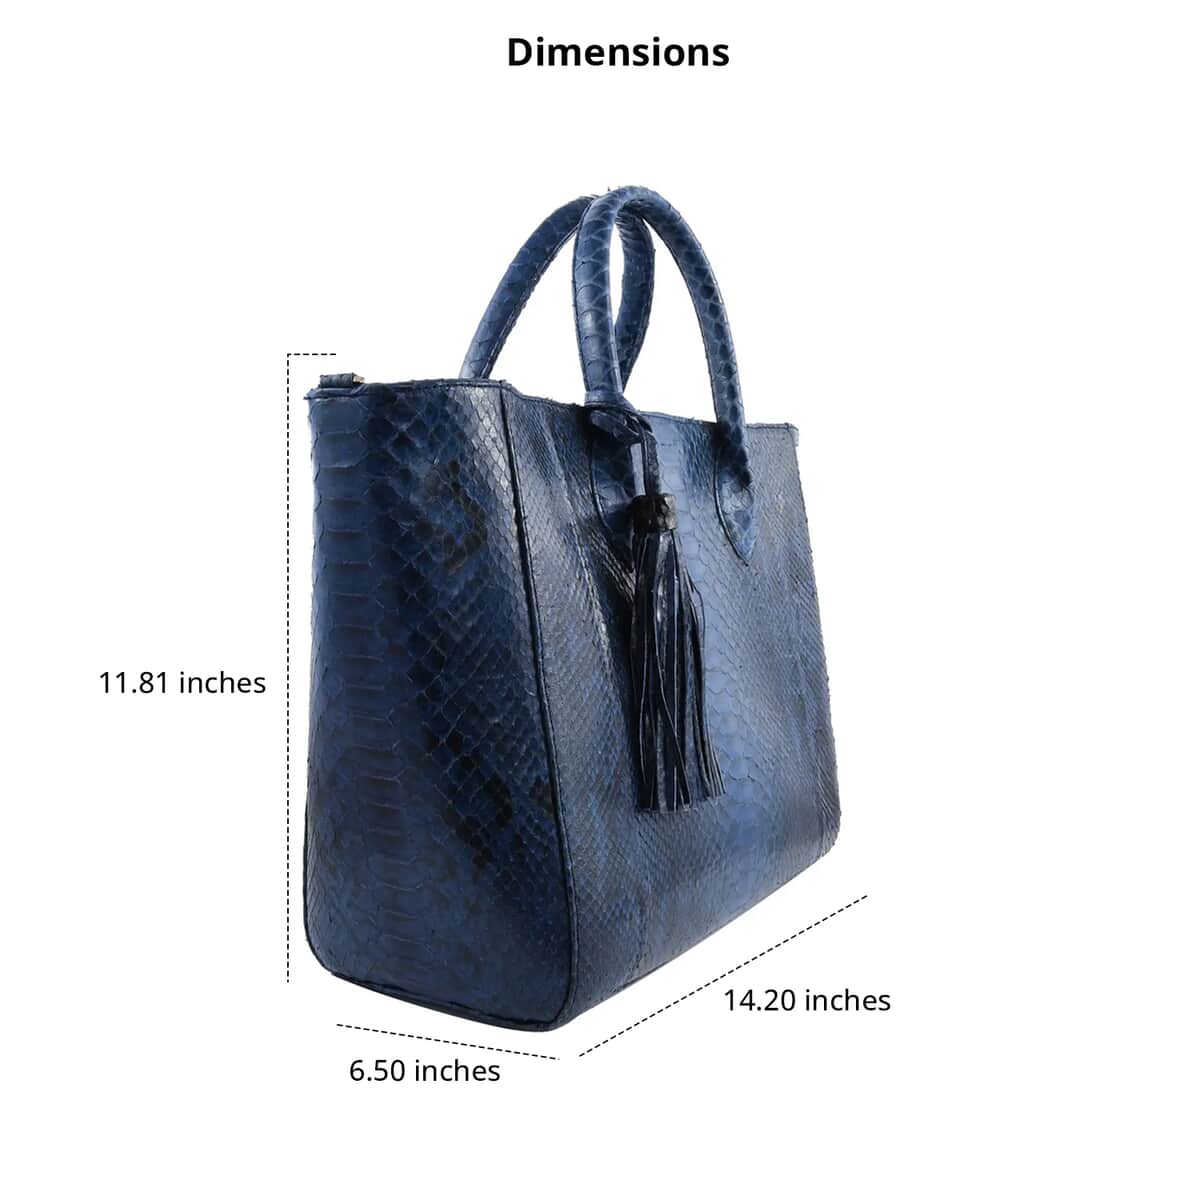 The Grand Pelle Handcrafted Blue Color 100 % Genuine Python Leather Tote Bag (14.20"x11.81"x6.50") image number 3